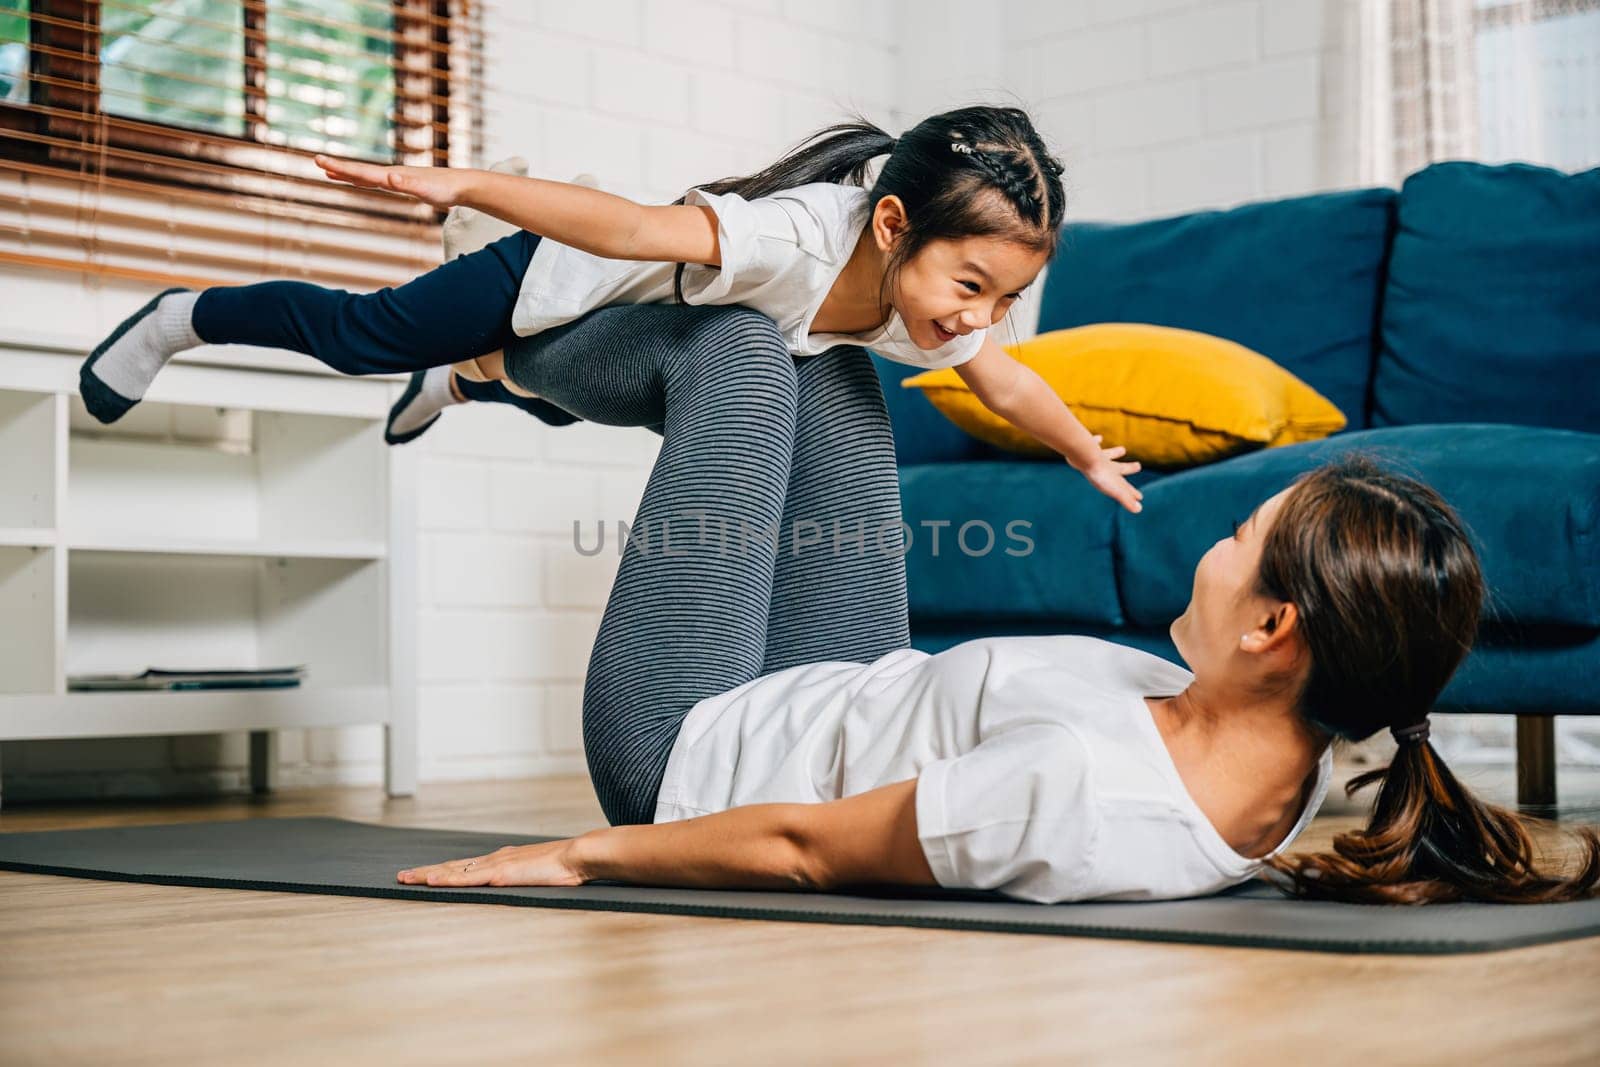 In a heartwarming family fitness session a mother and her child find joy in pretending to 'fly' like airplanes while practicing Pilates and yoga promoting trust harmony and happiness.